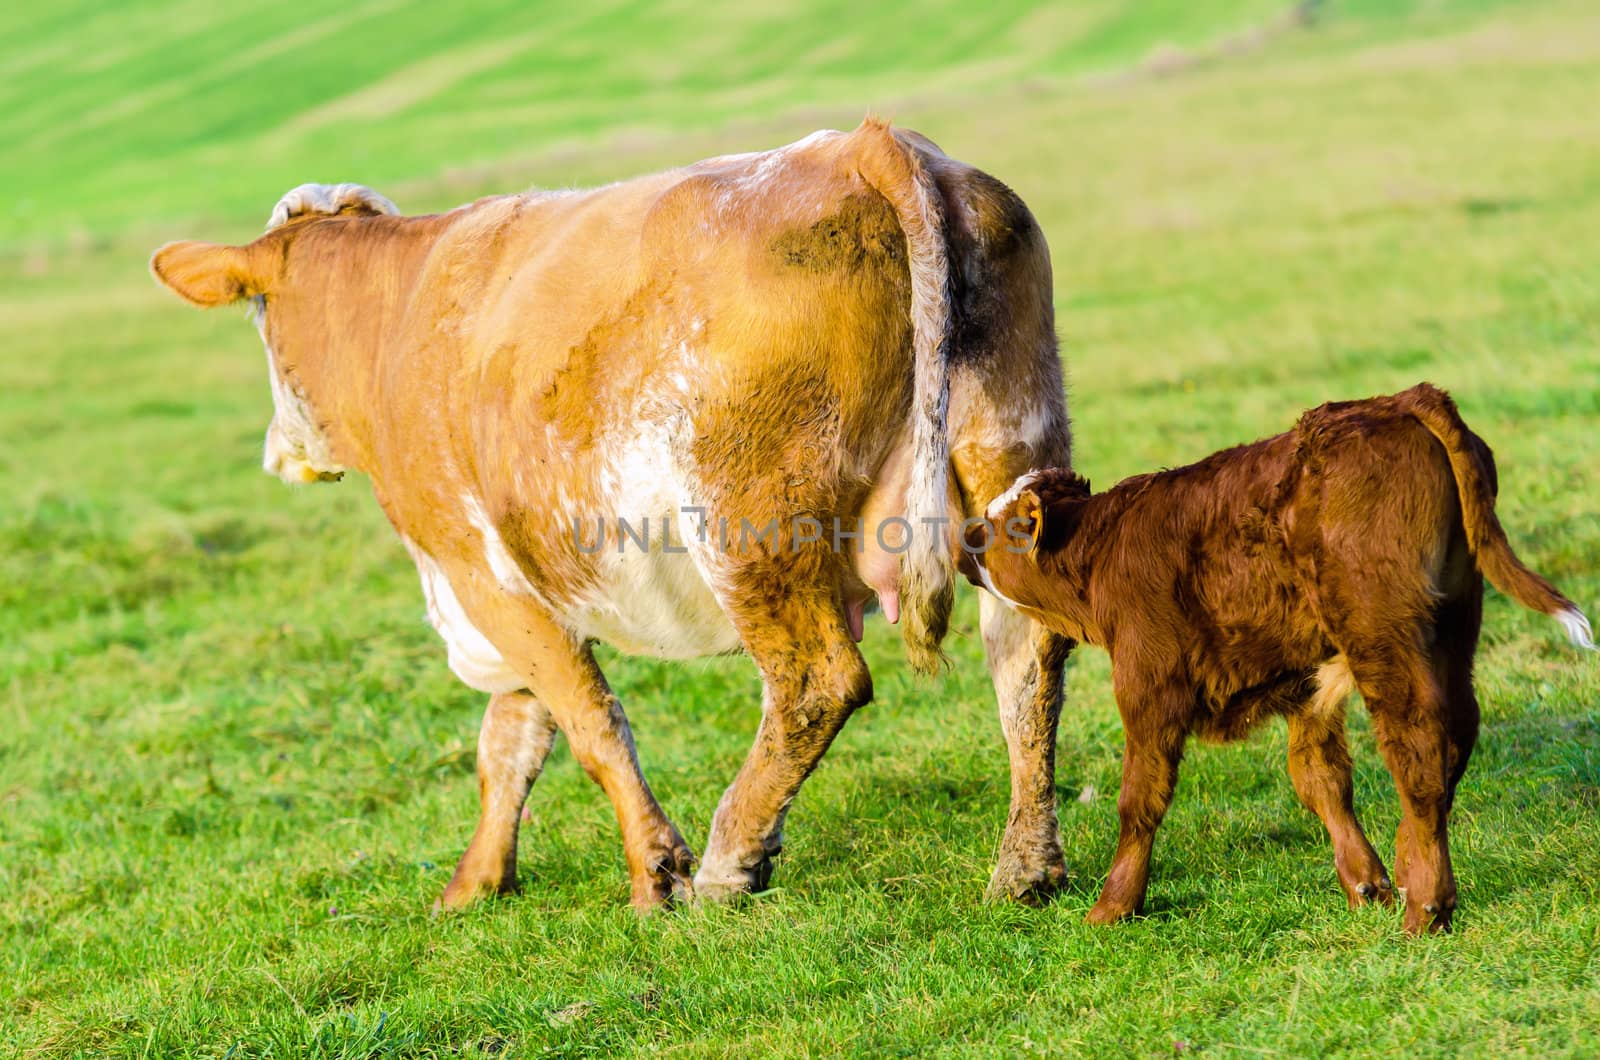 cow followed by his calf